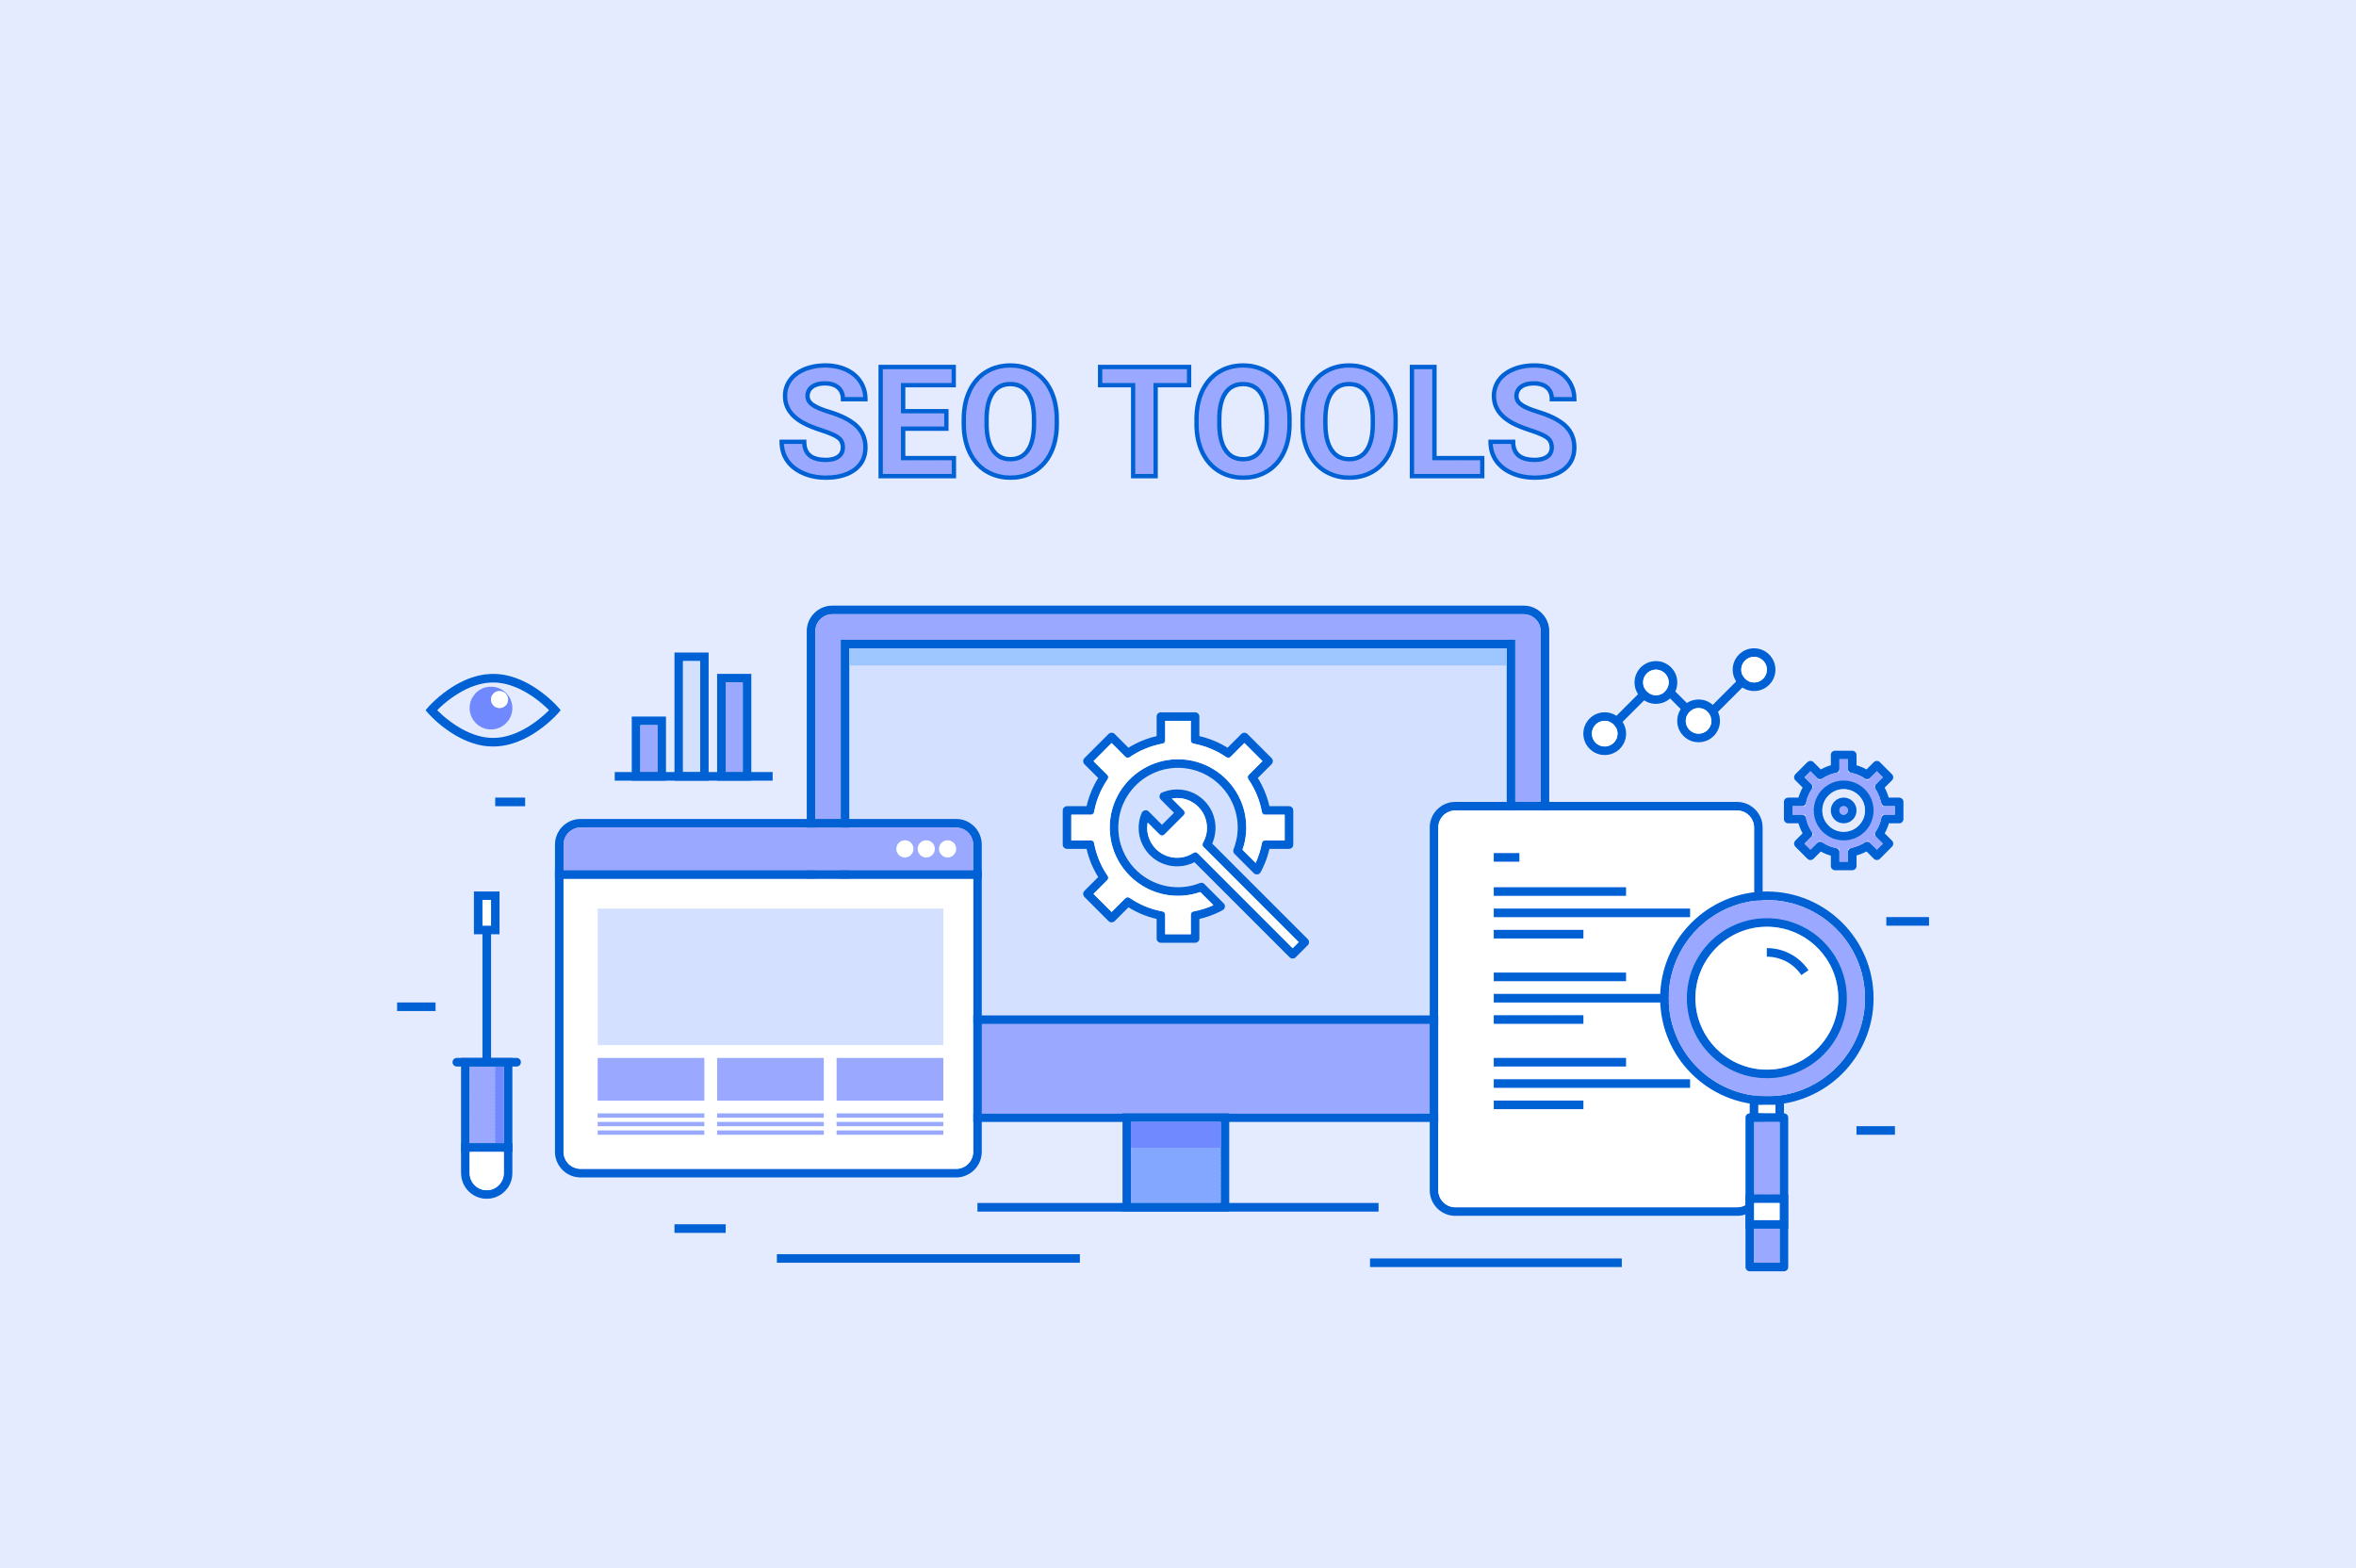 Afvise Acquiesce drag 50 Best SEO Tools to Optimize Your Website - ShareThis